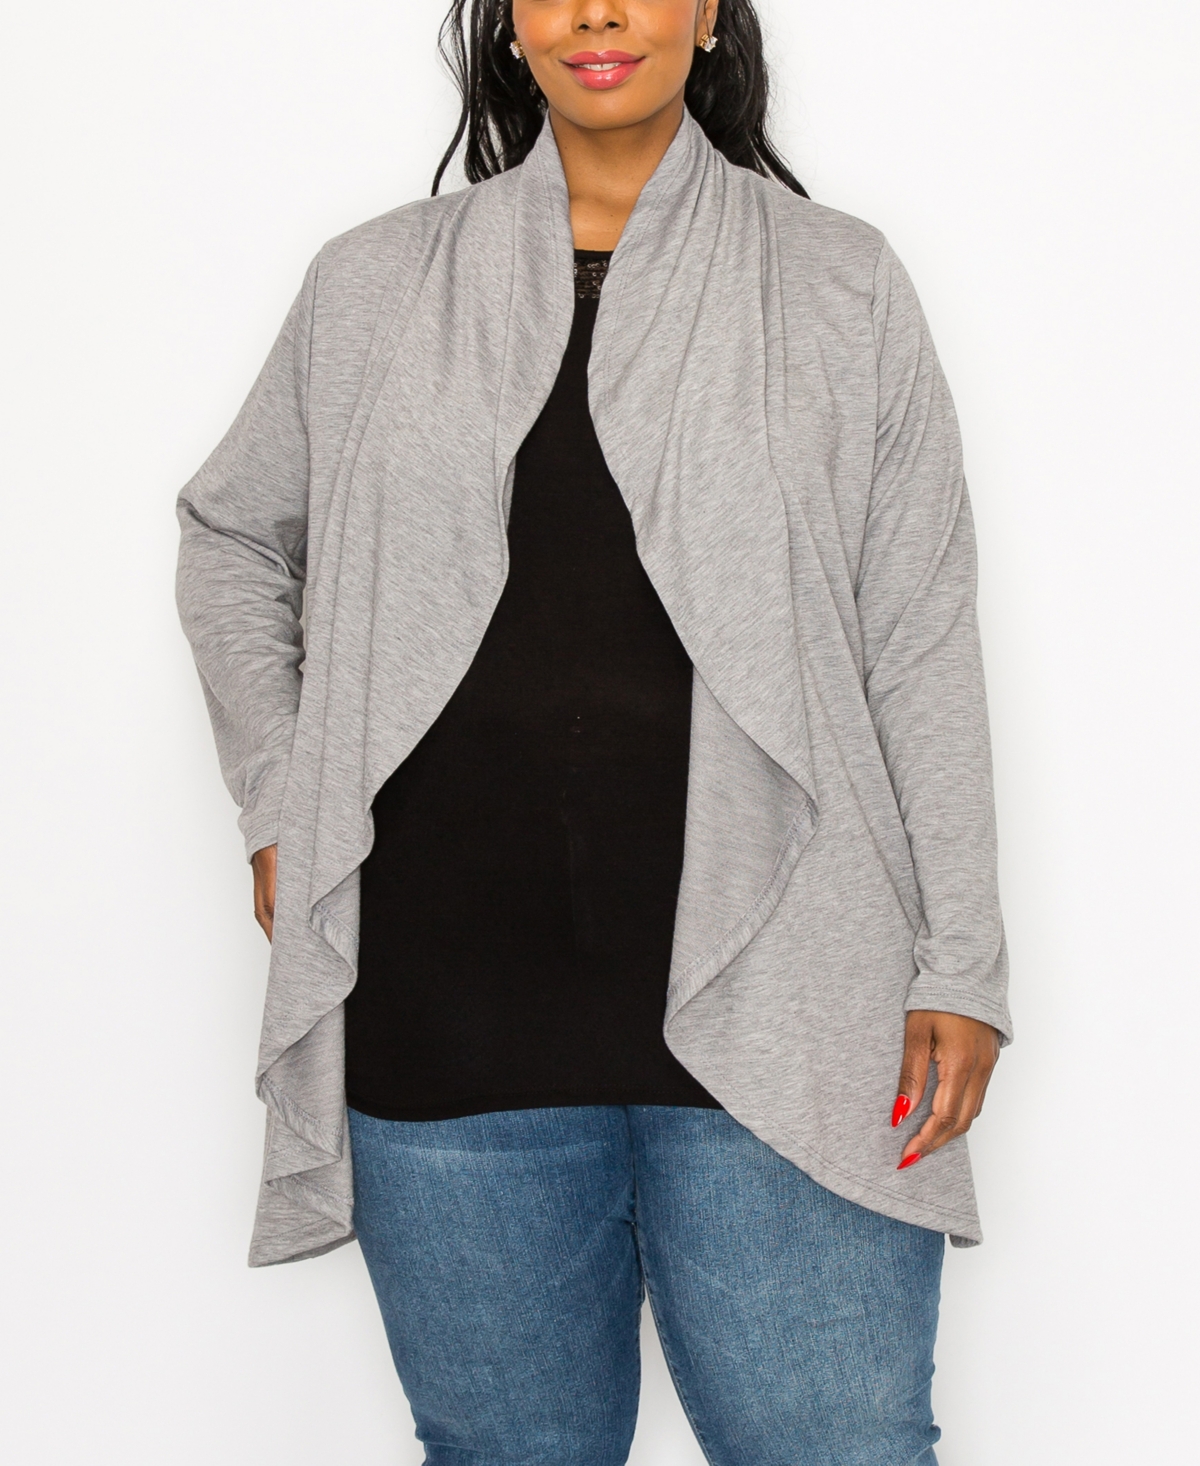 Shop Coin 1804 Plus Size Draped Flyaway Cardigan Duster Knit Top In Heather Gray